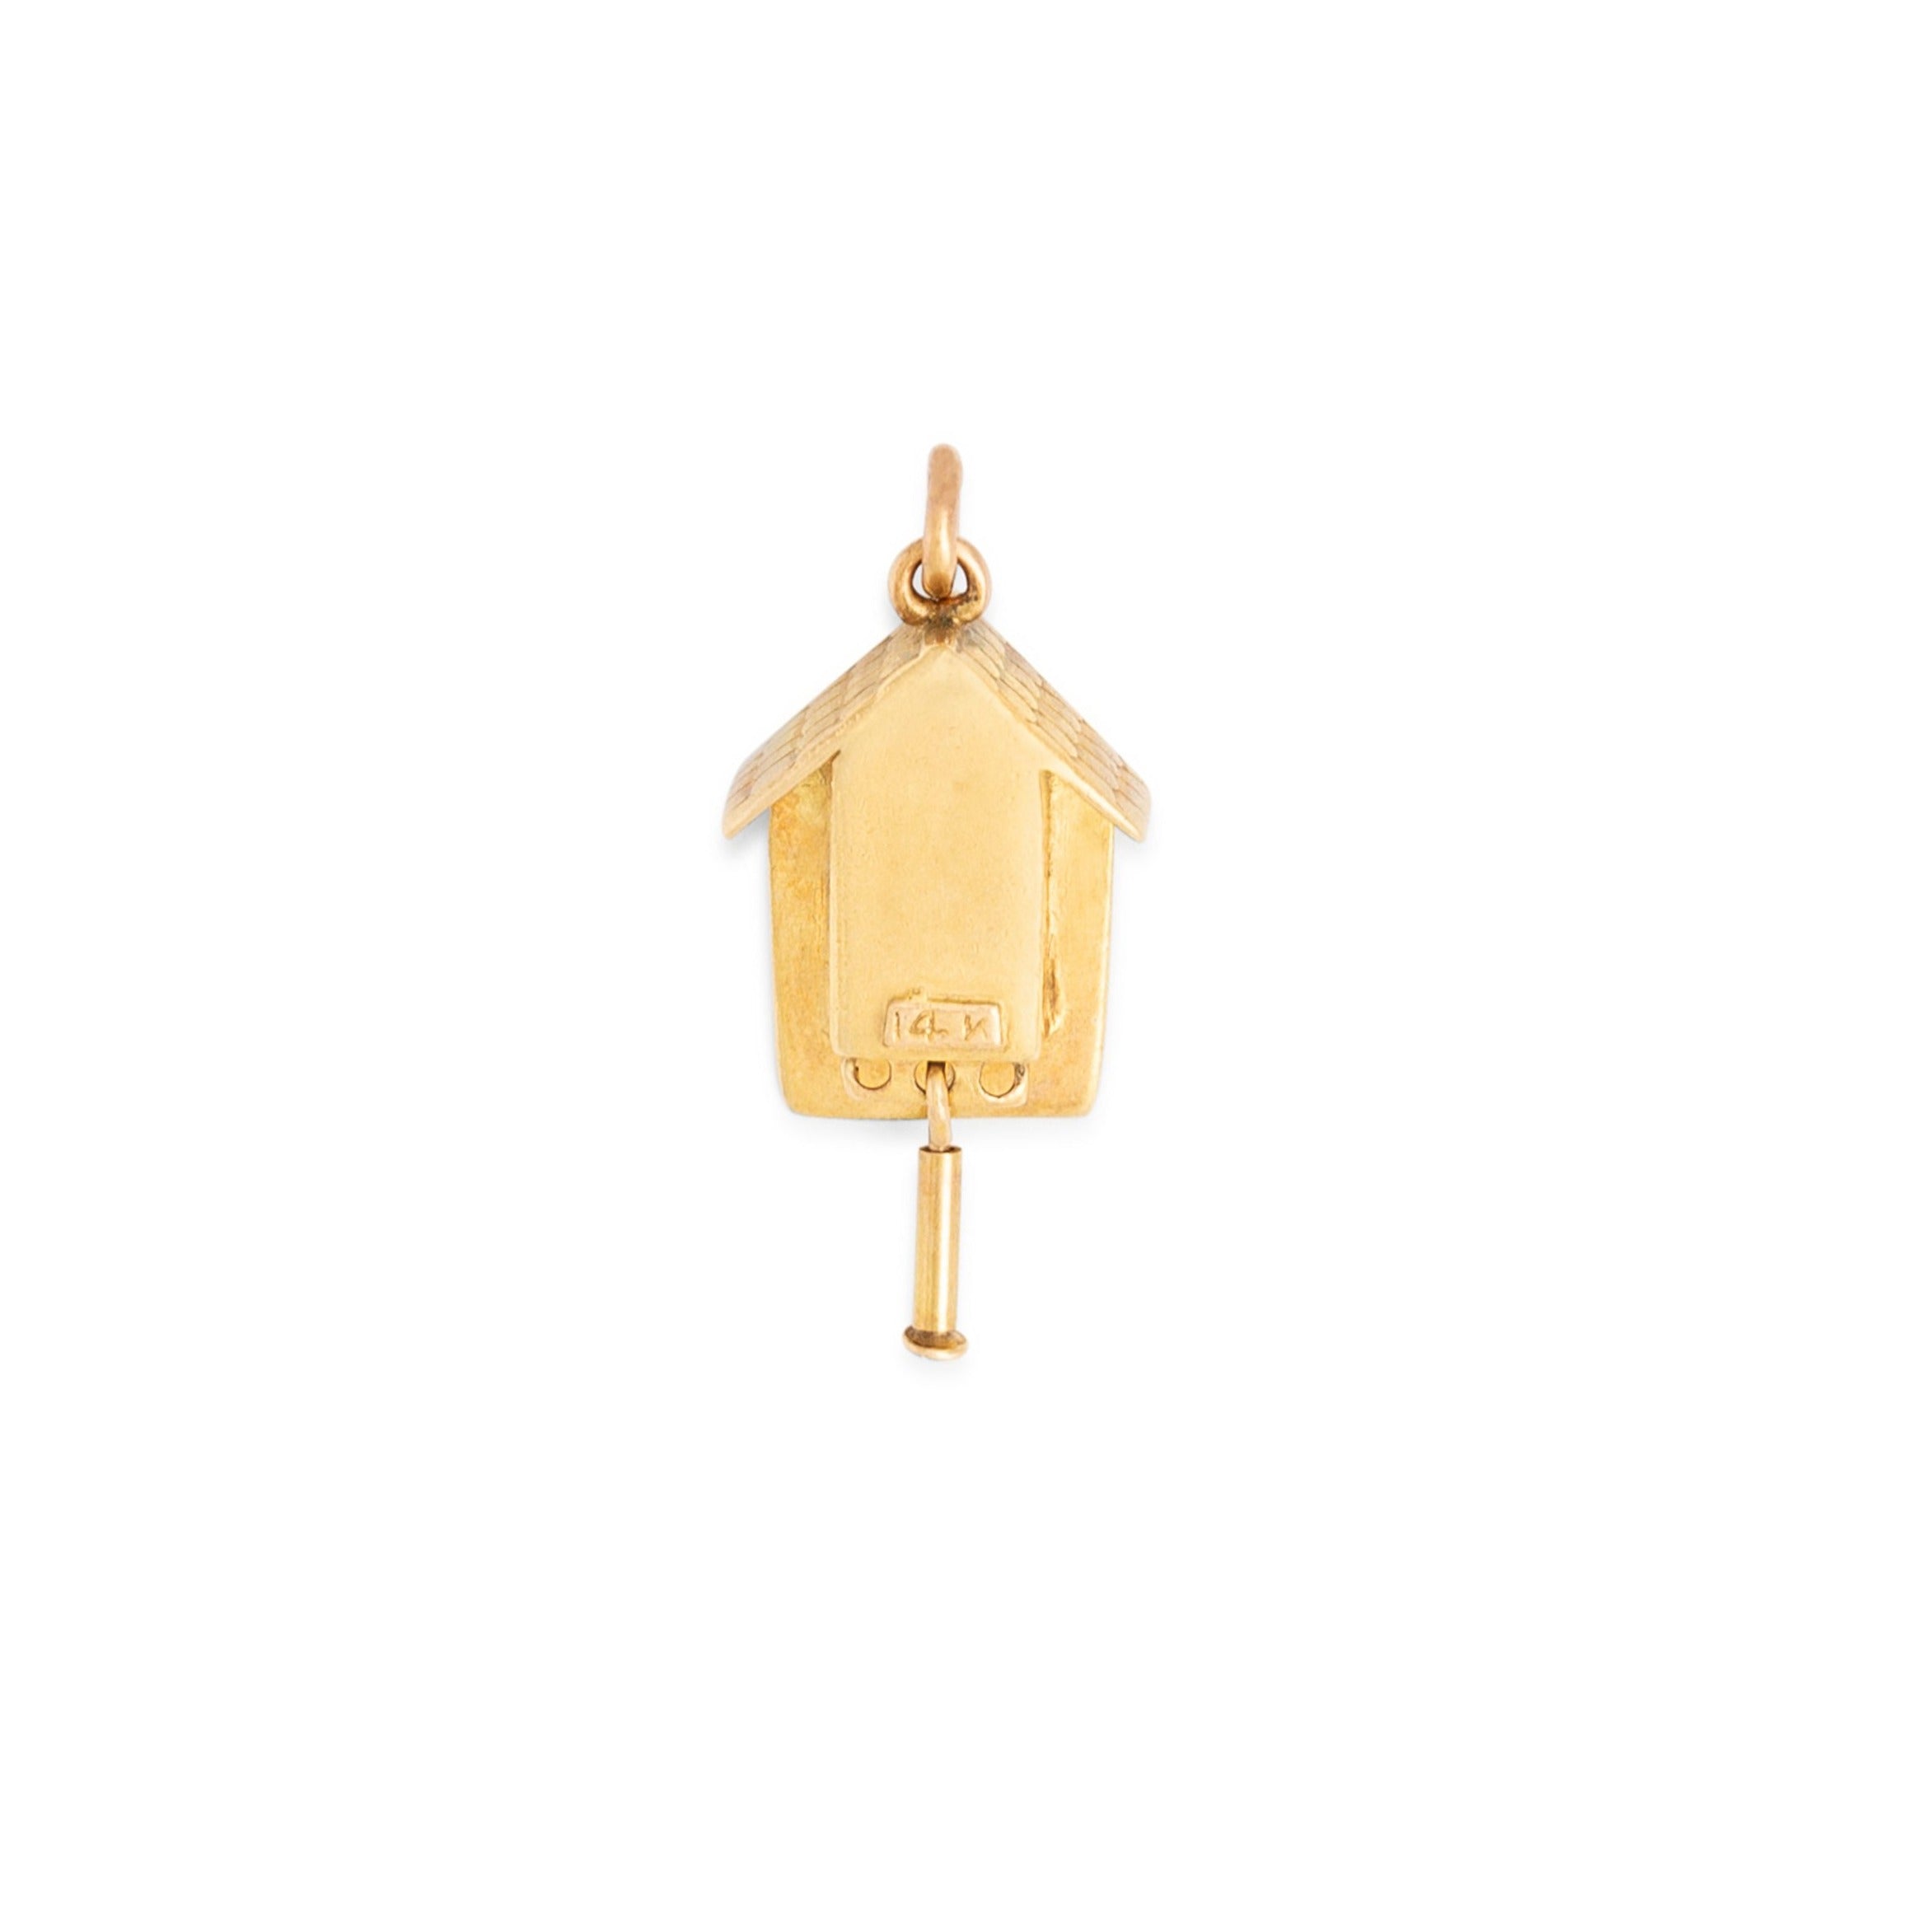 Movable Cuckoo Clock 14k Gold And Enamel Charm